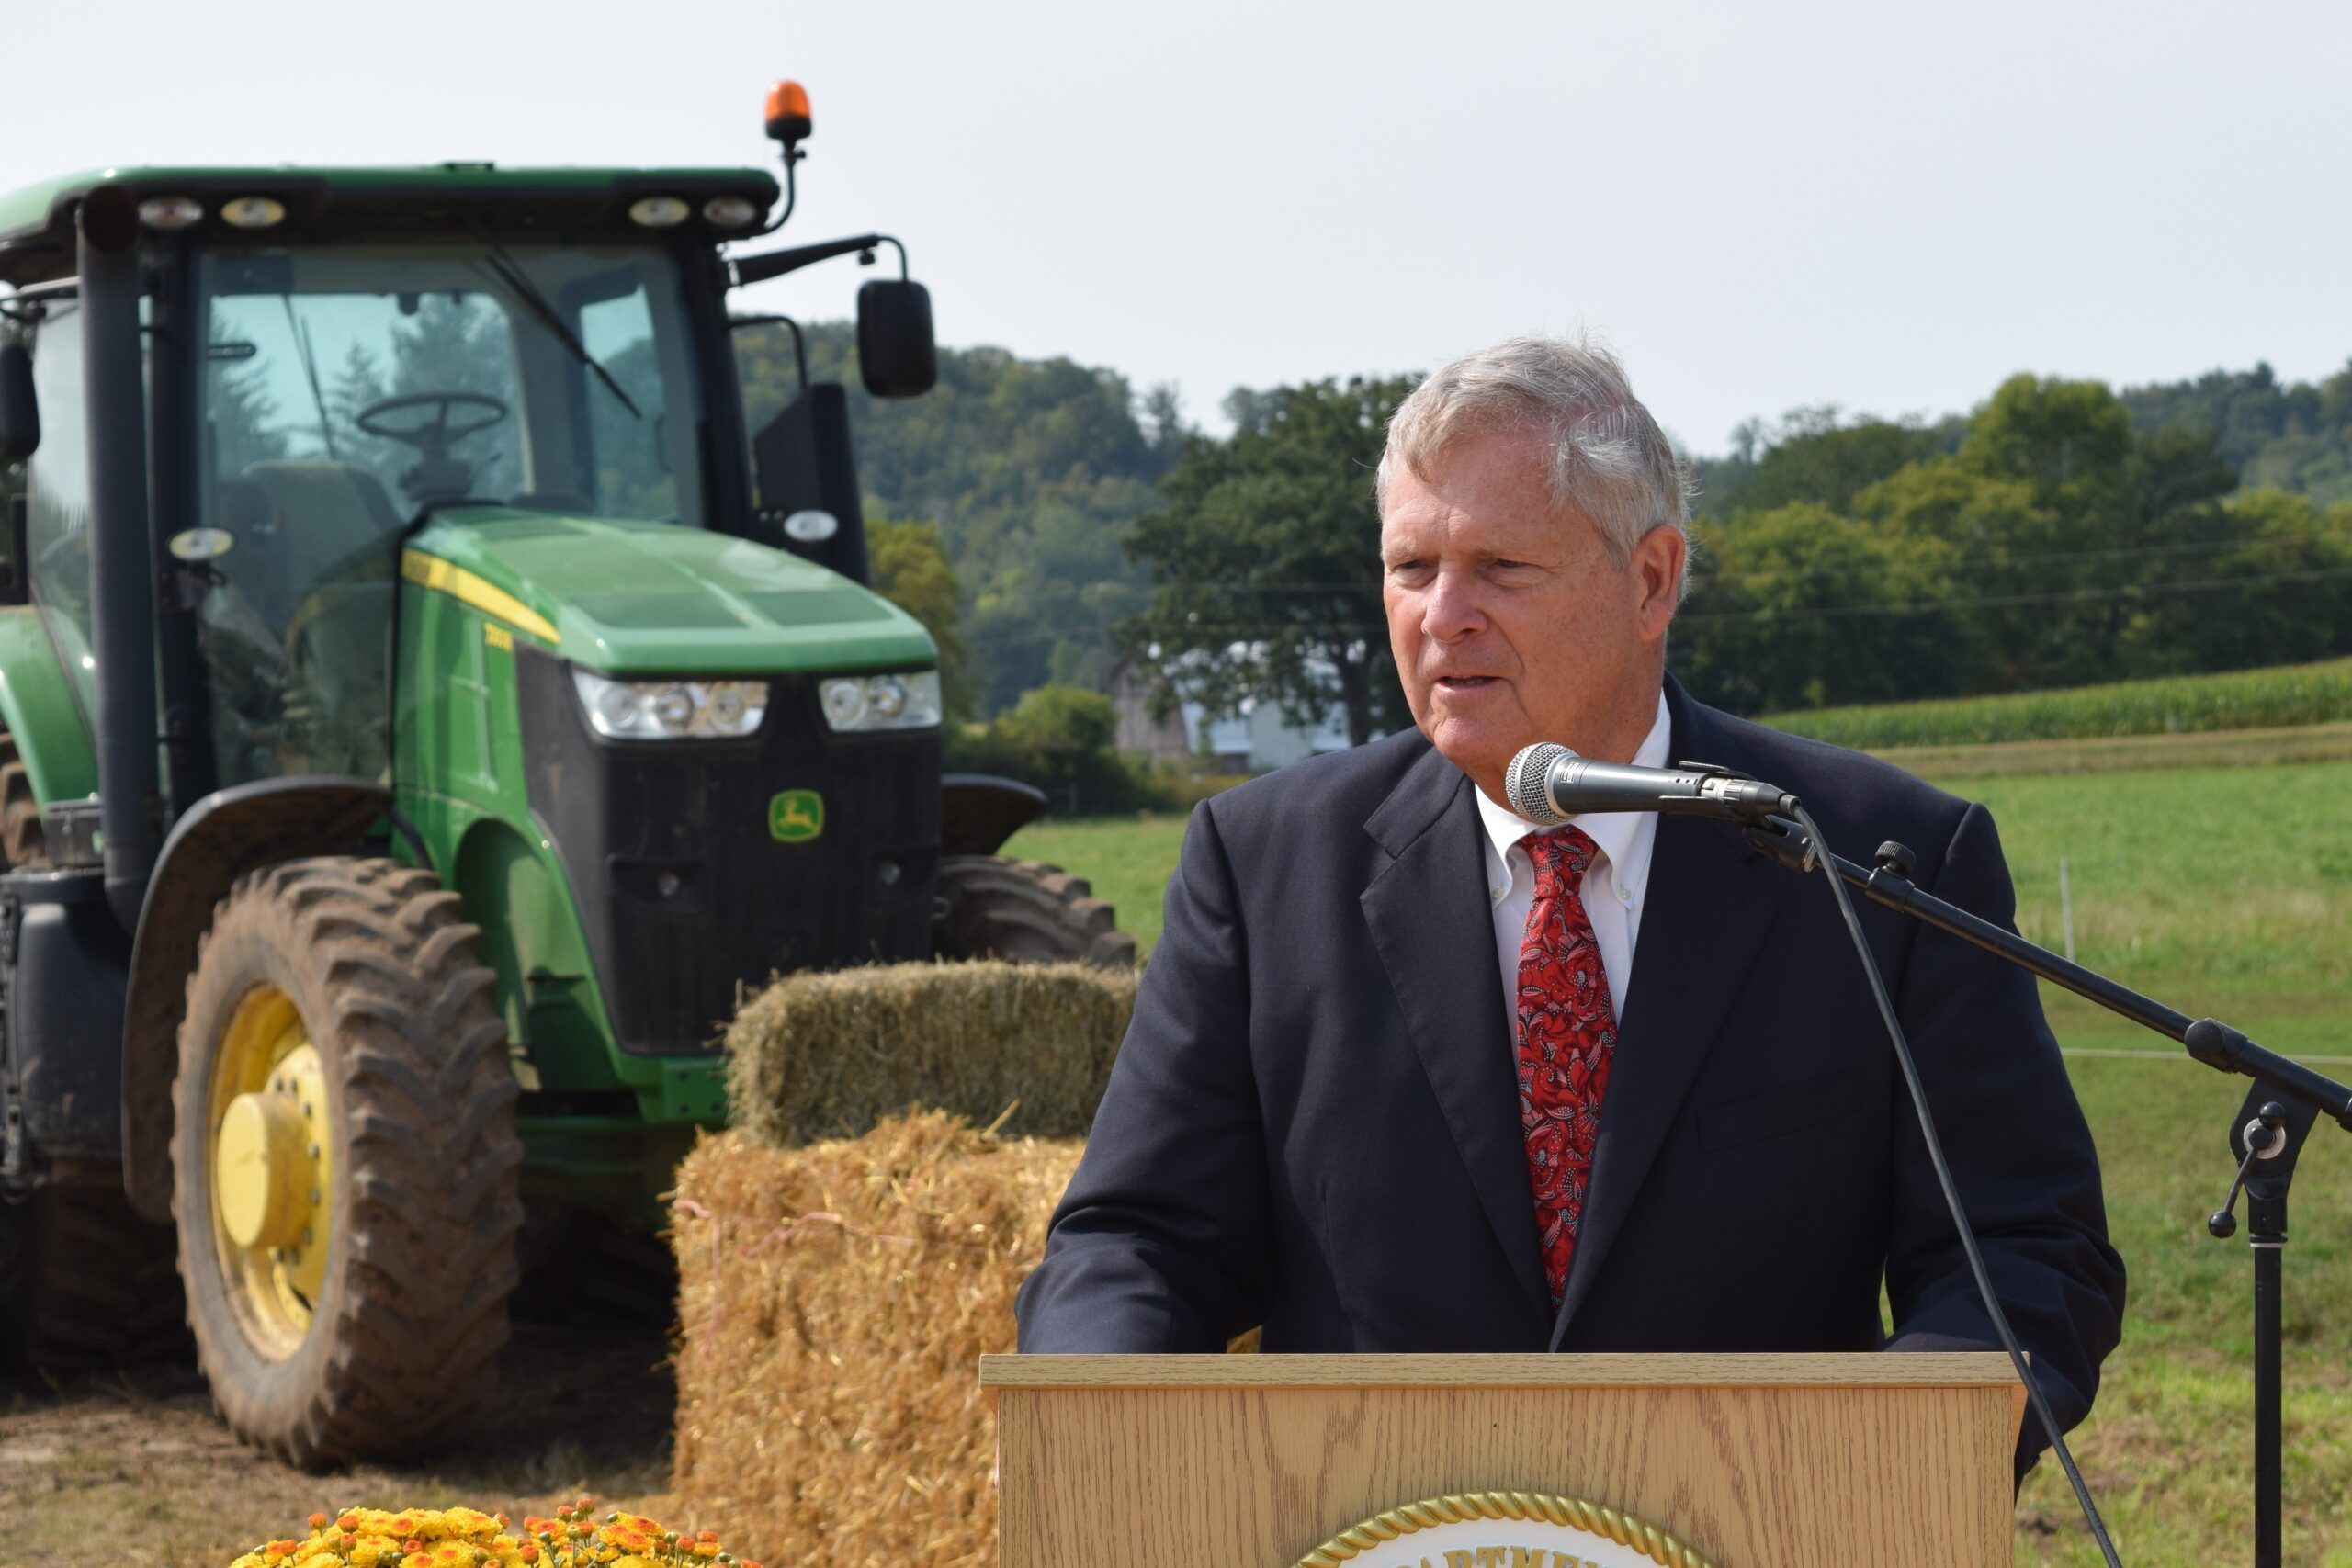 Federal investment in climate-smart agriculture is coming to Wisconsin farms